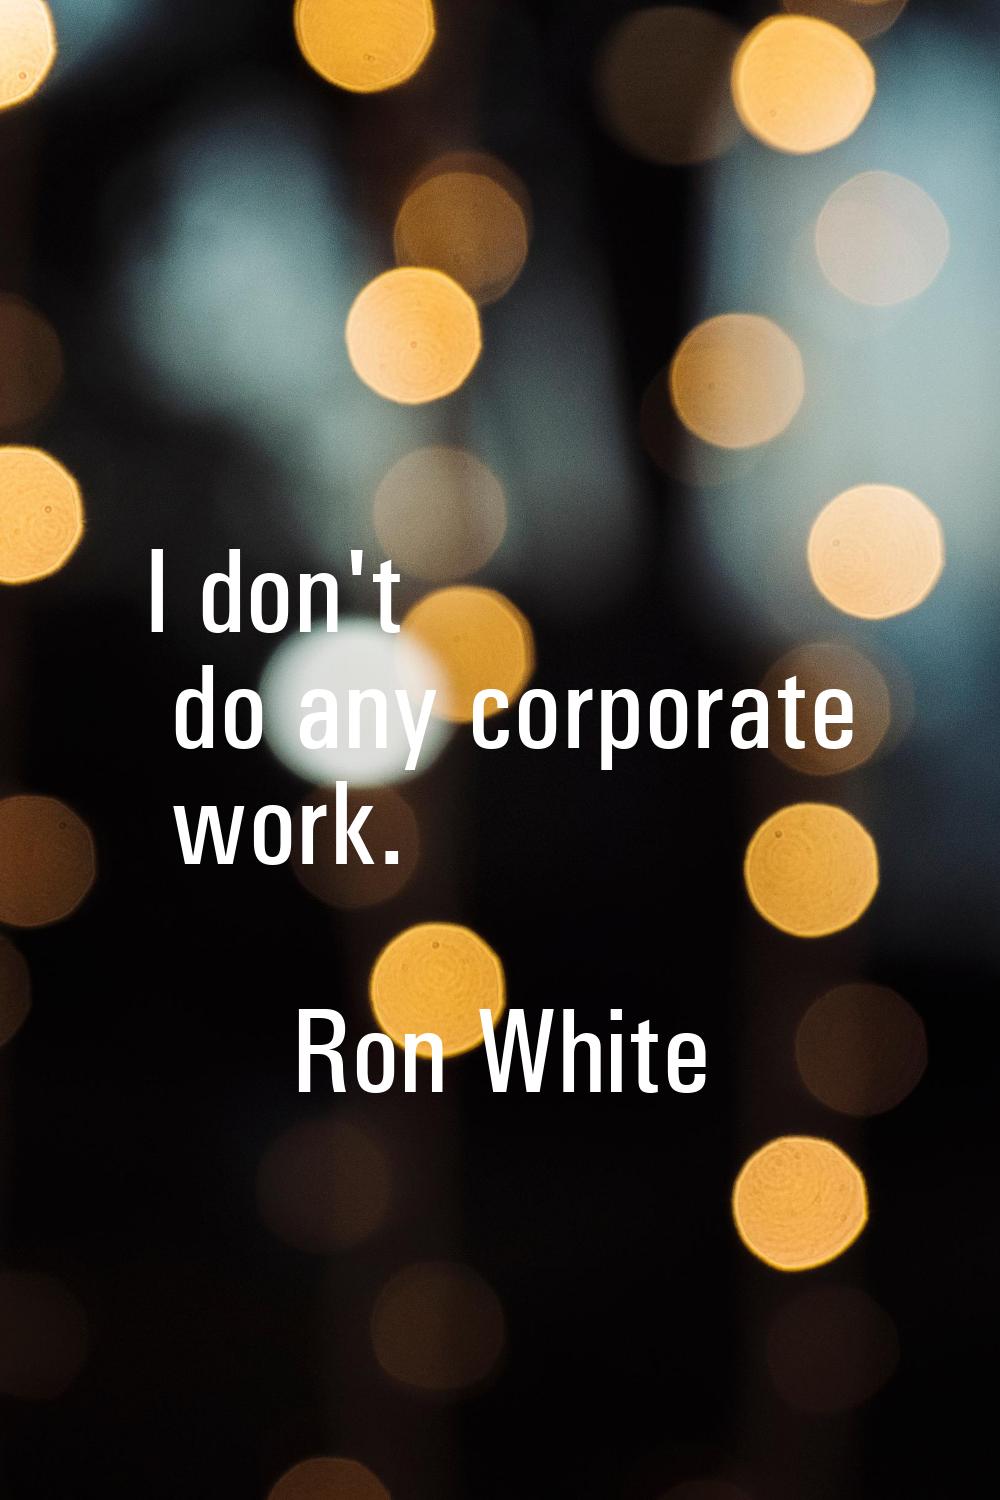 I don't do any corporate work.